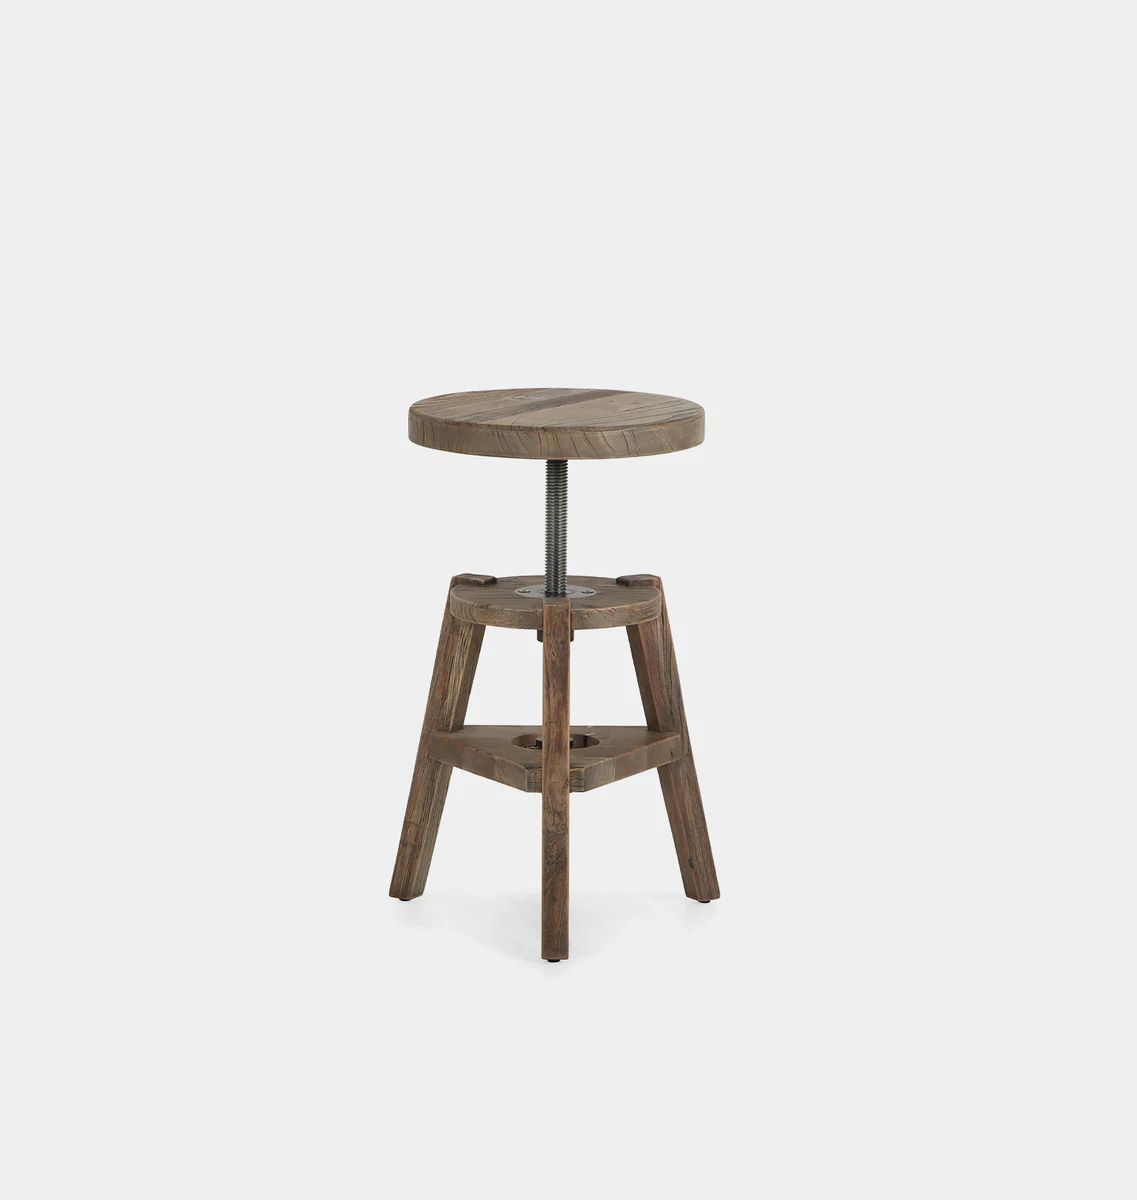 Addy Pedestal Accent Stool | Amber Interiors